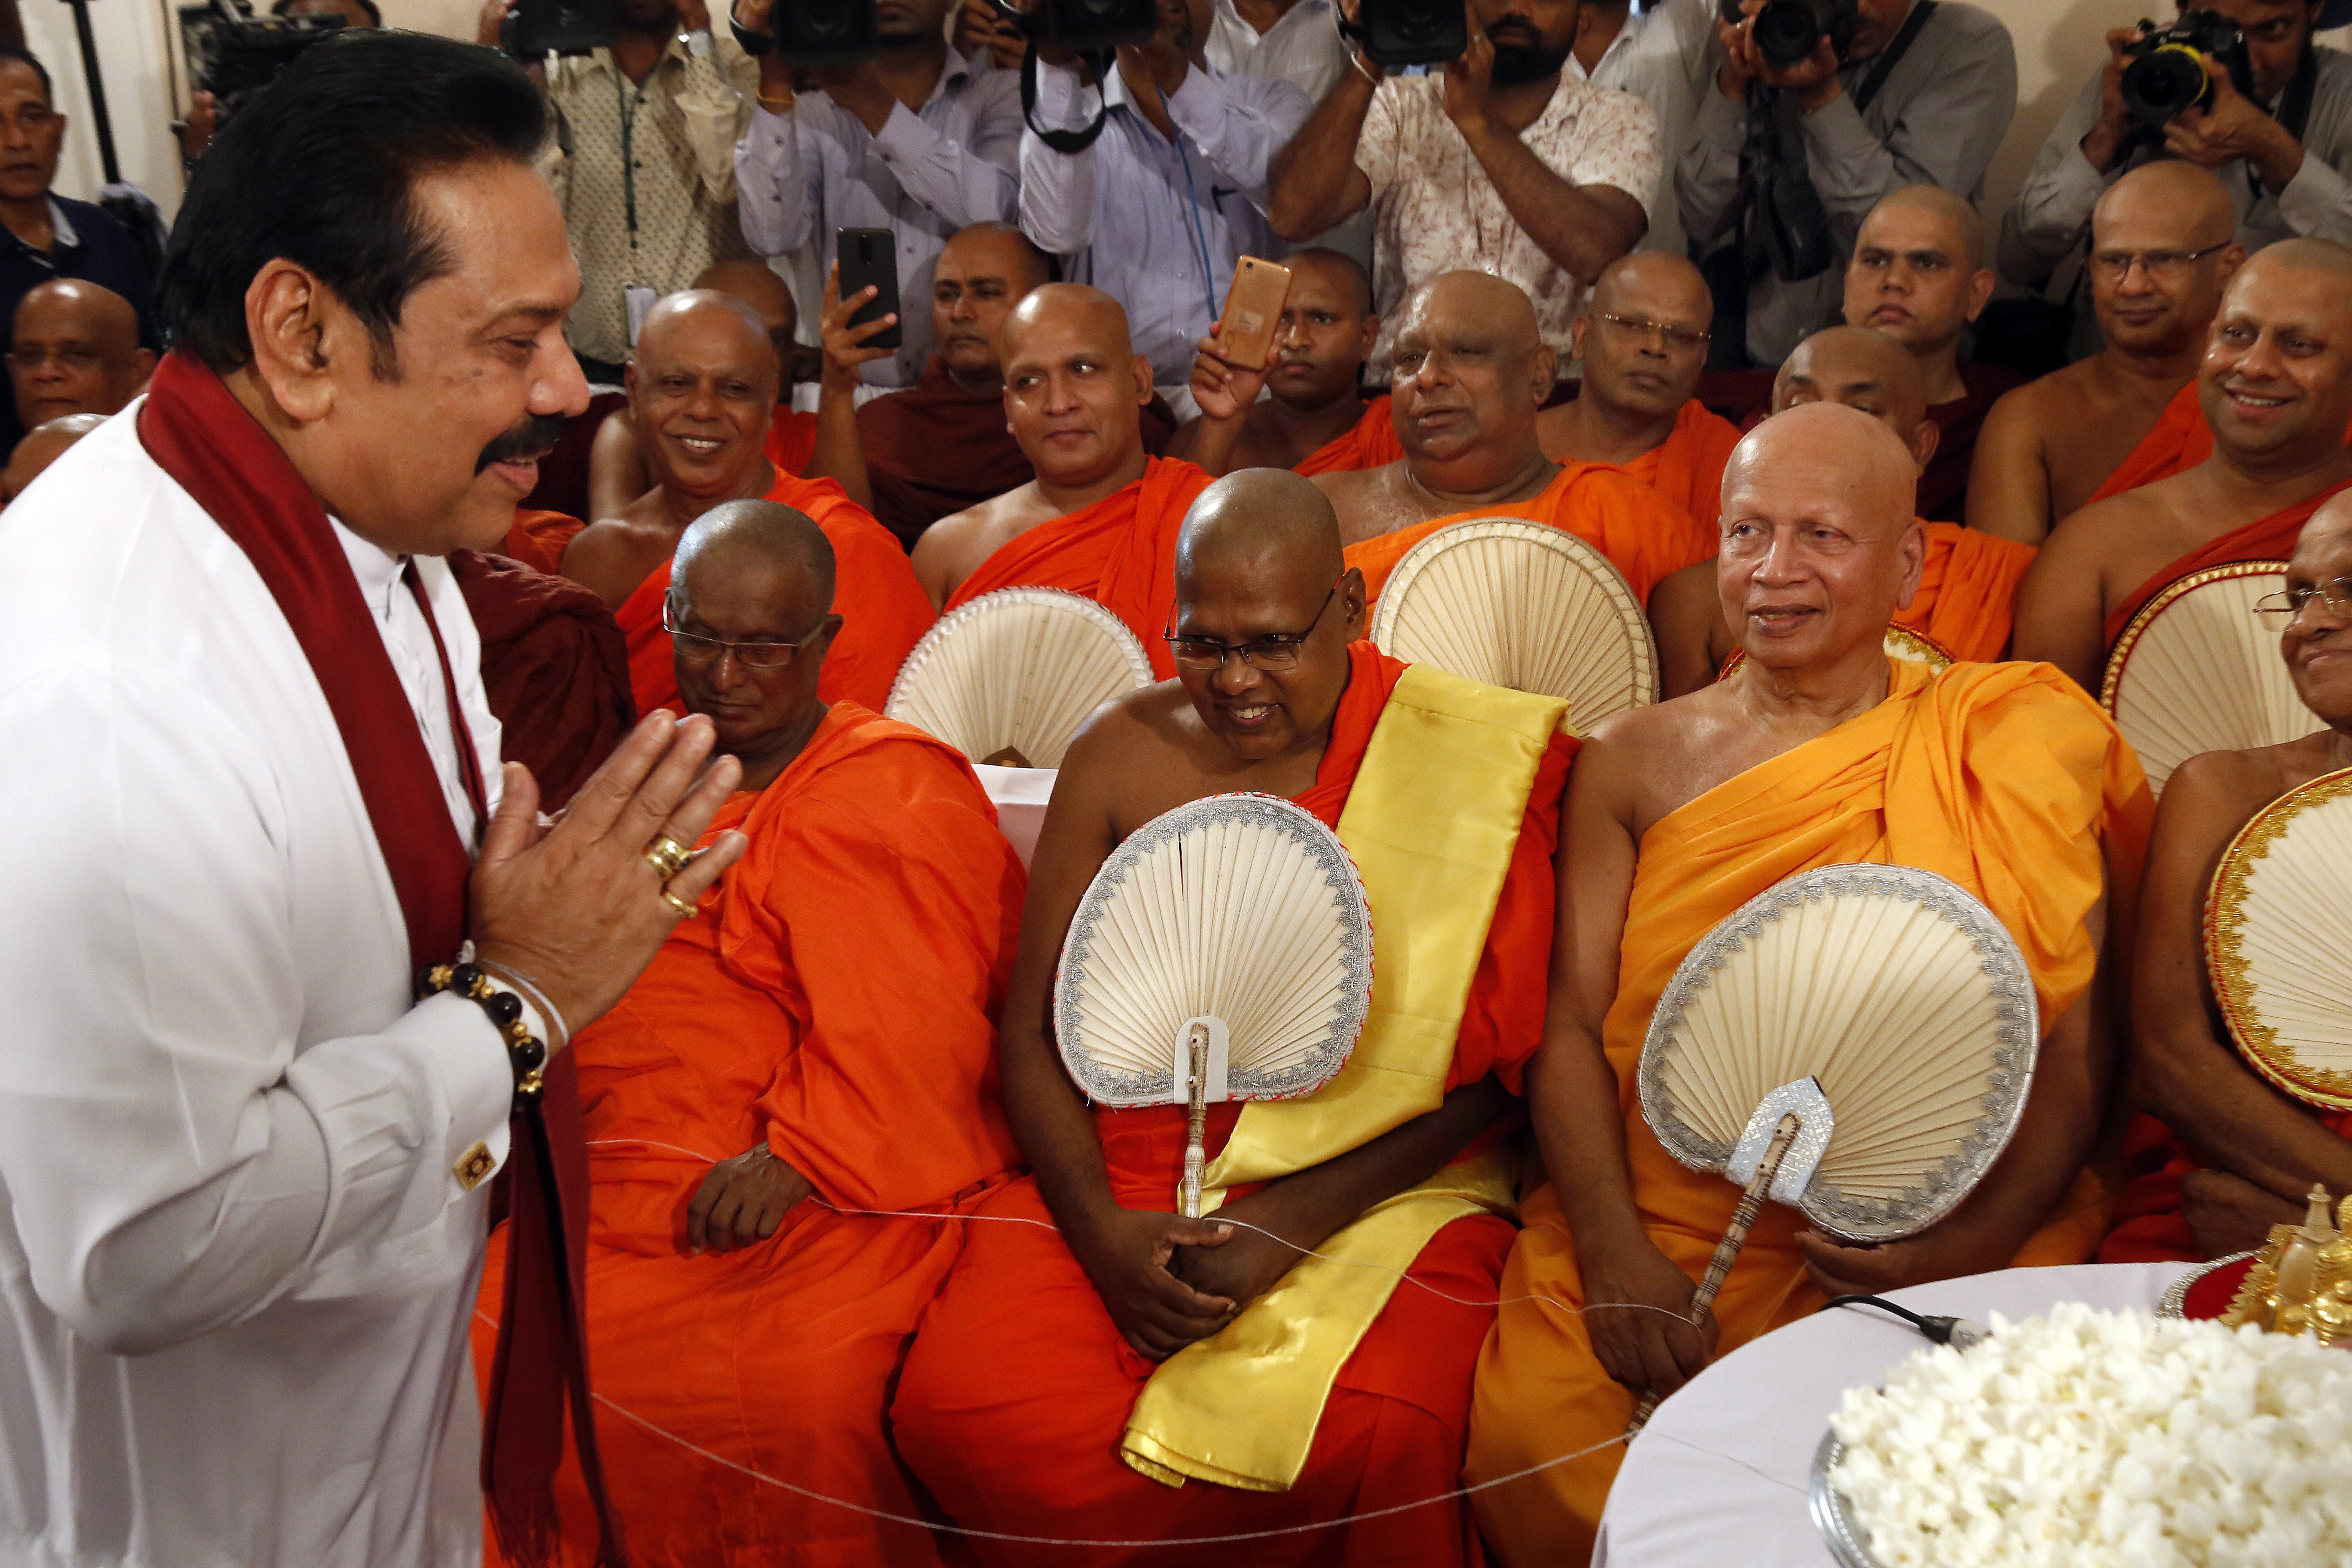 Former Sri Lankan President Mahinda Rajapaksa salutes and greets the Buddhist clergy prior to assuming duties as the new Prime Minister in Colombo, Sri Lanka. Photo: EPA